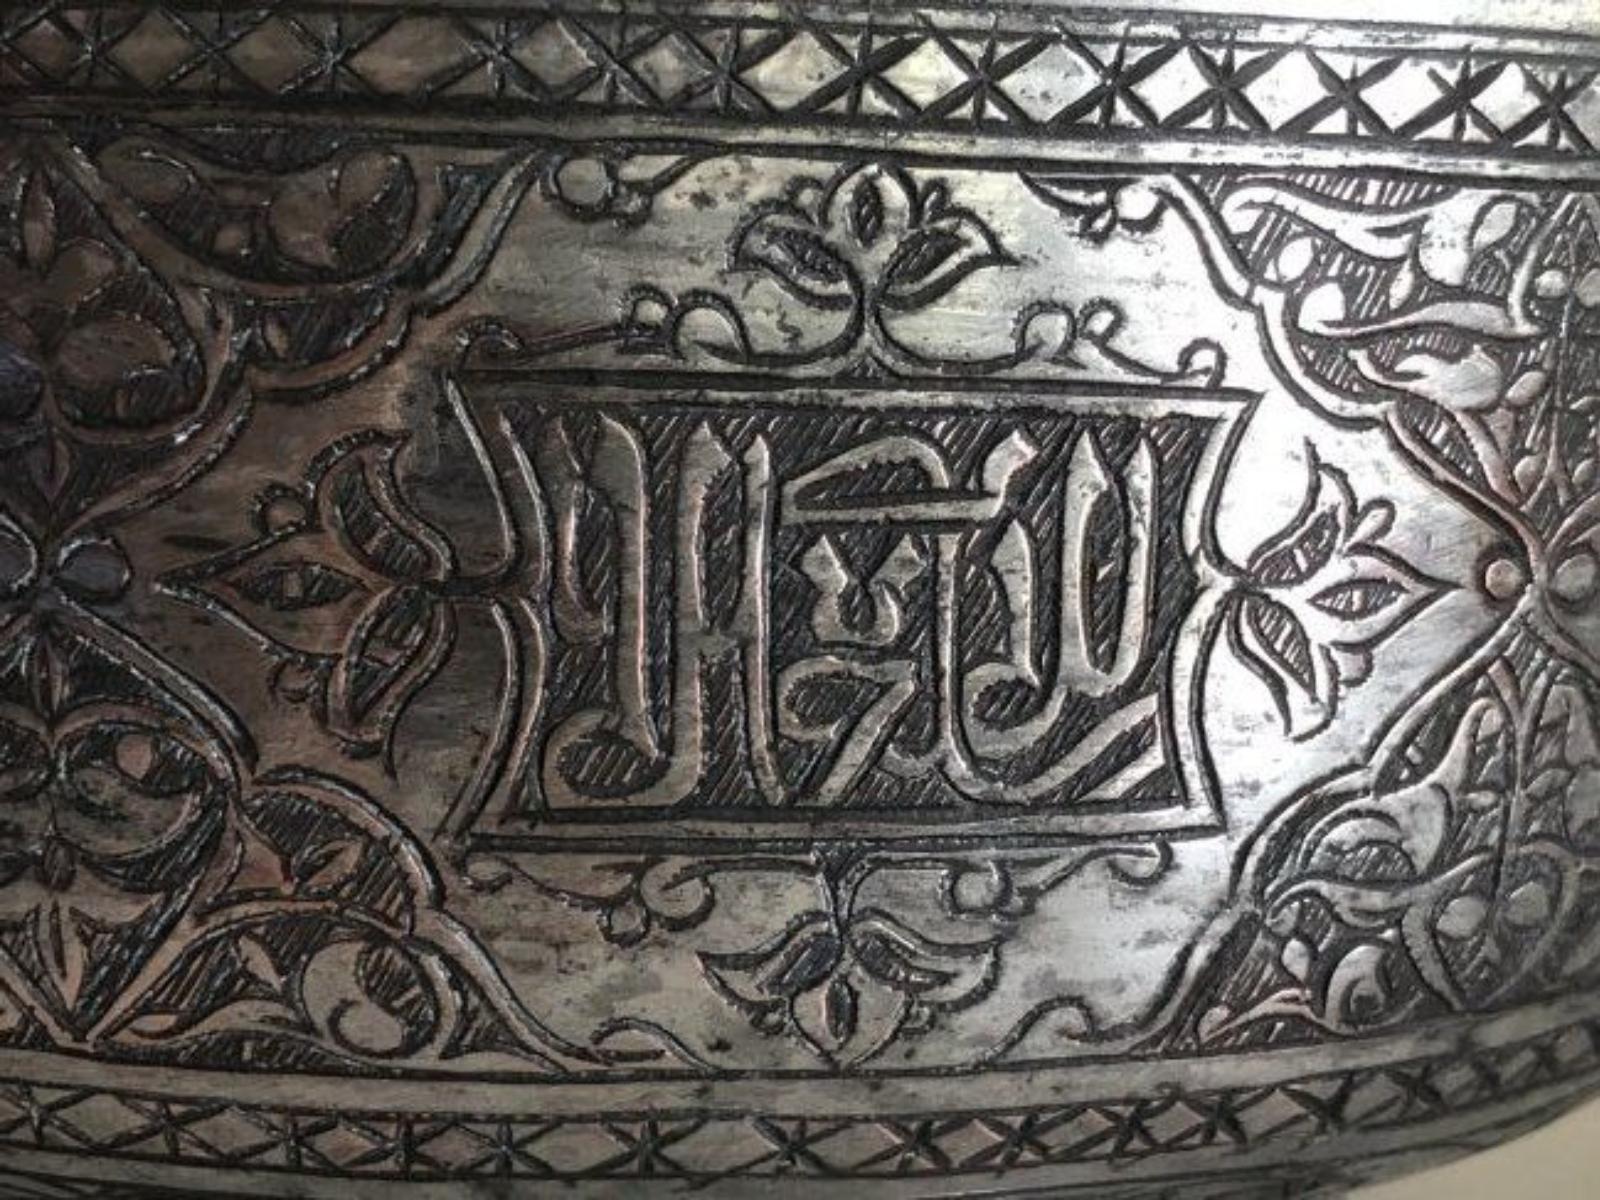 Persian Safavid Hand Chiseled Tinned Copper Bowl In Good Condition For Sale In Newmanstown, PA